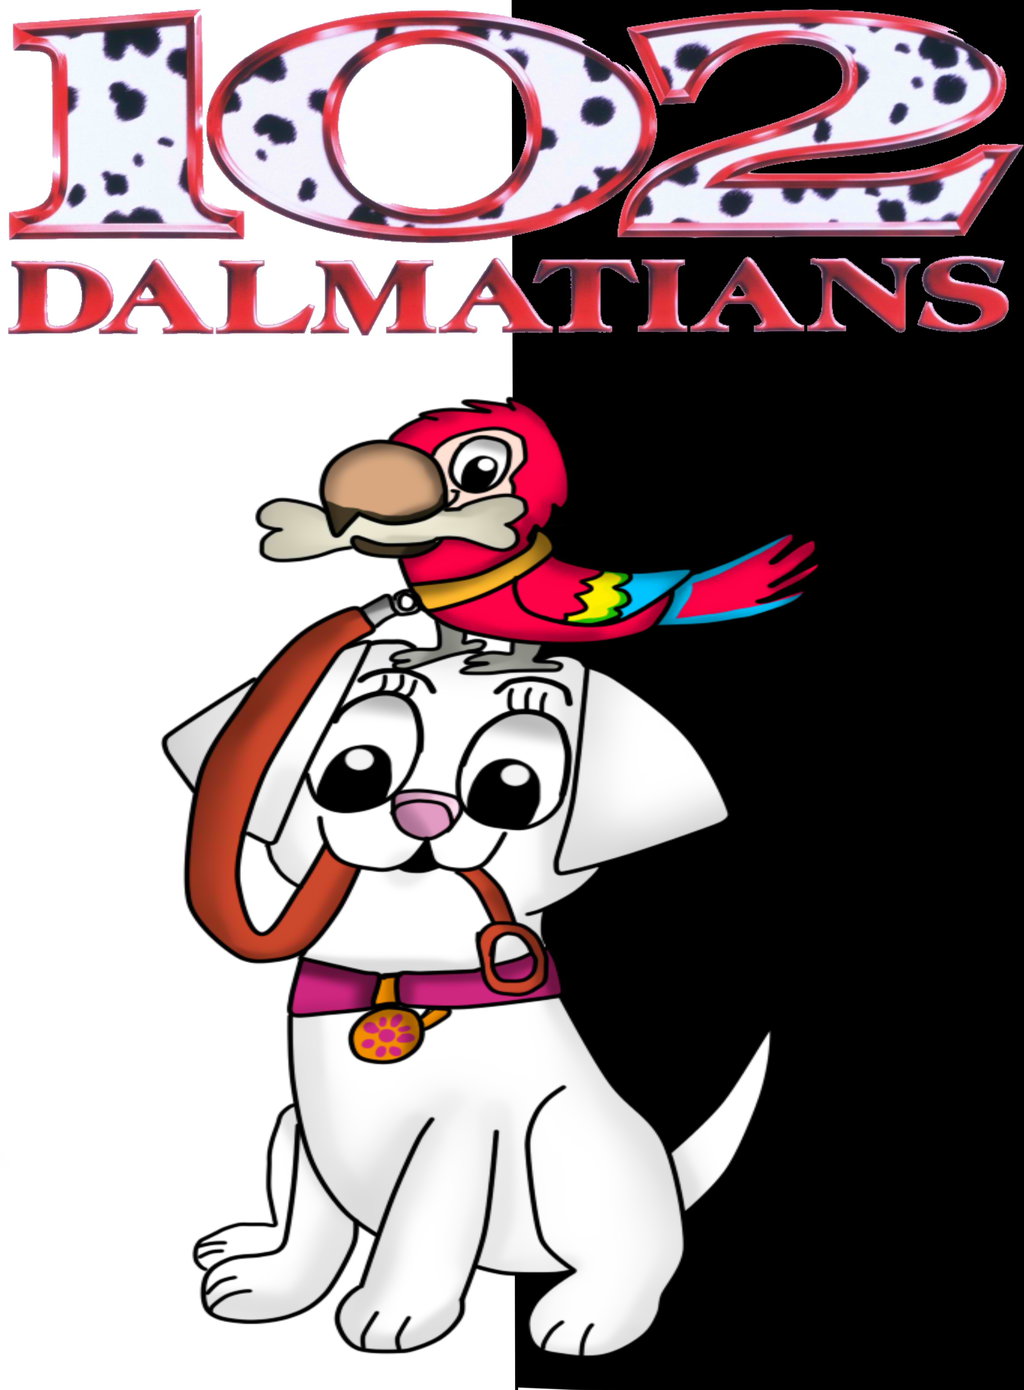 Dalmatians 2d Poster By Dulcechica19